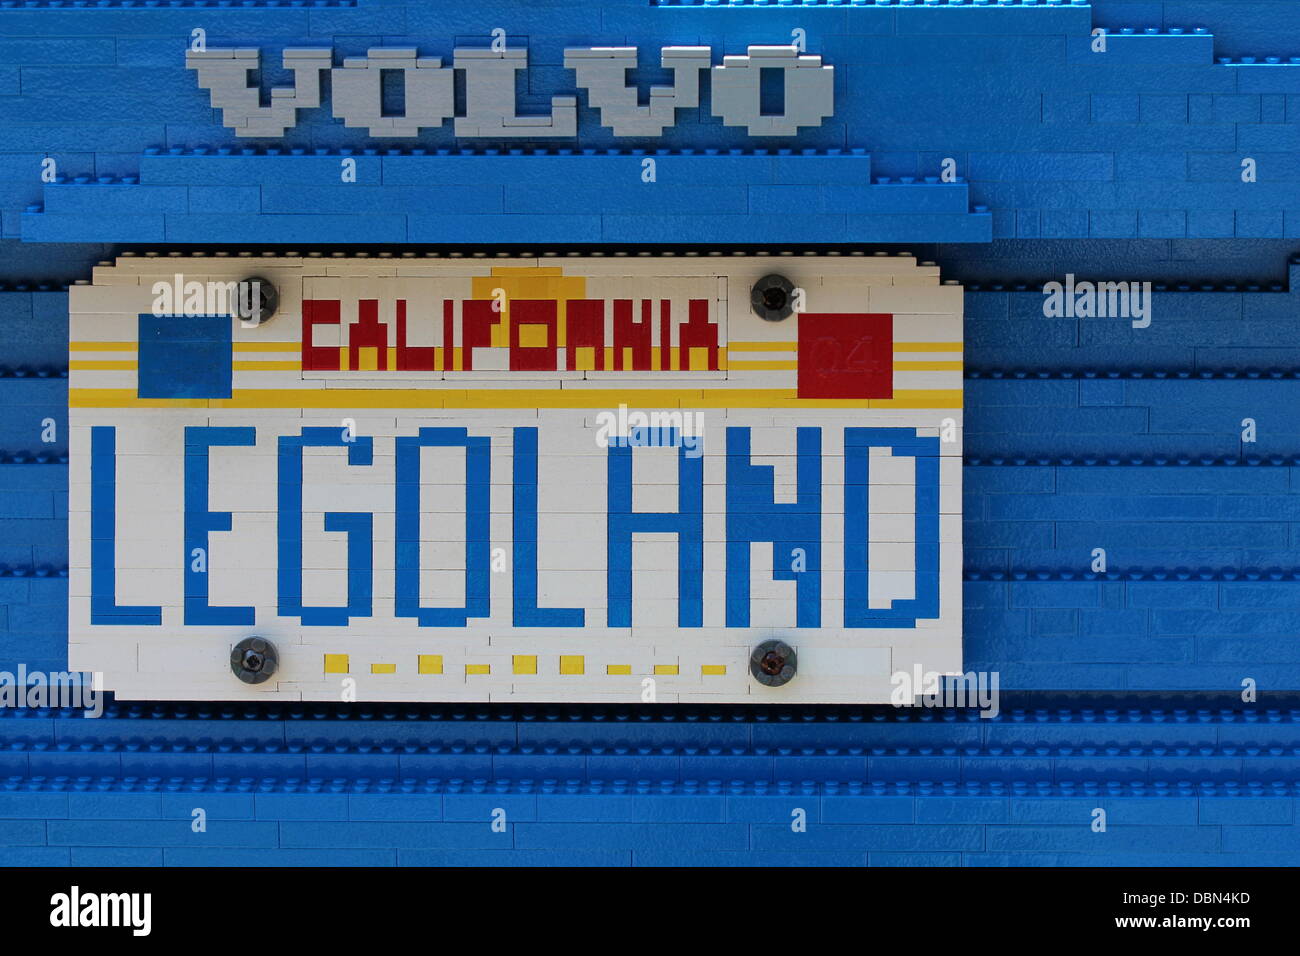 Boss pranked by LEGO car  As LEGOLAND California General Manager Peter Ronchetti left work one afternoon, he was shocked to find that his Volvo SUV was missing. In its place was a 1:1 scale LEGO model, made from 201,760 pieces of LEGO and weighing in at 2,934 pounds, strategically placed in his parking spot by his employees. Rochetti, clearly puzzled at first, enjoyed a good laugh  Stock Photo